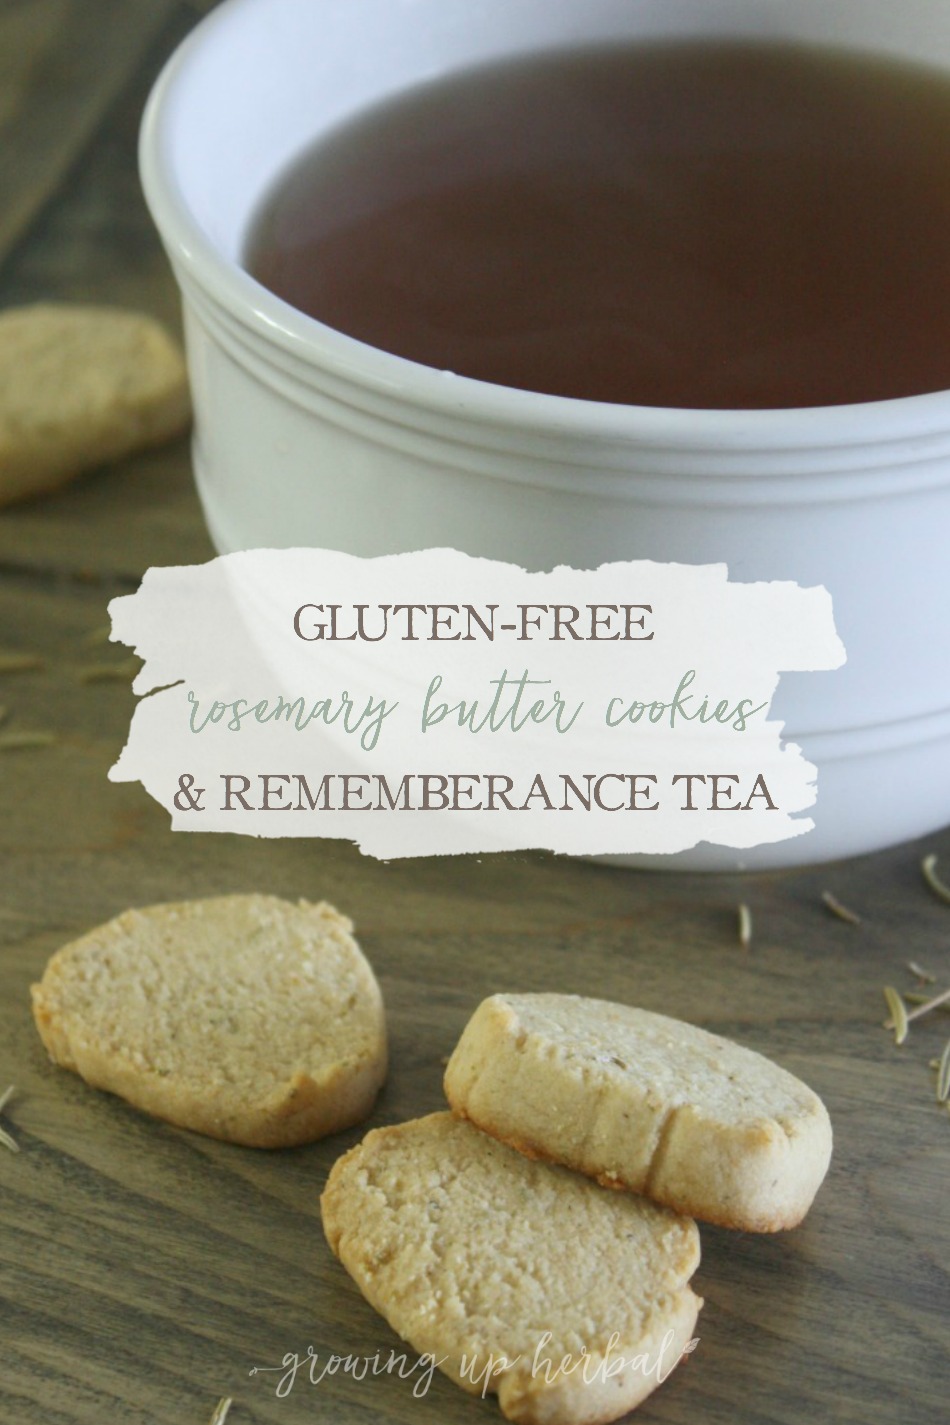 Afternoon Tea: Gluten-Free Rosemary Butter Cookies & Remembrance Tea | Growing Up Herbal | Join me for afternoon tea and cookies... recipes included!